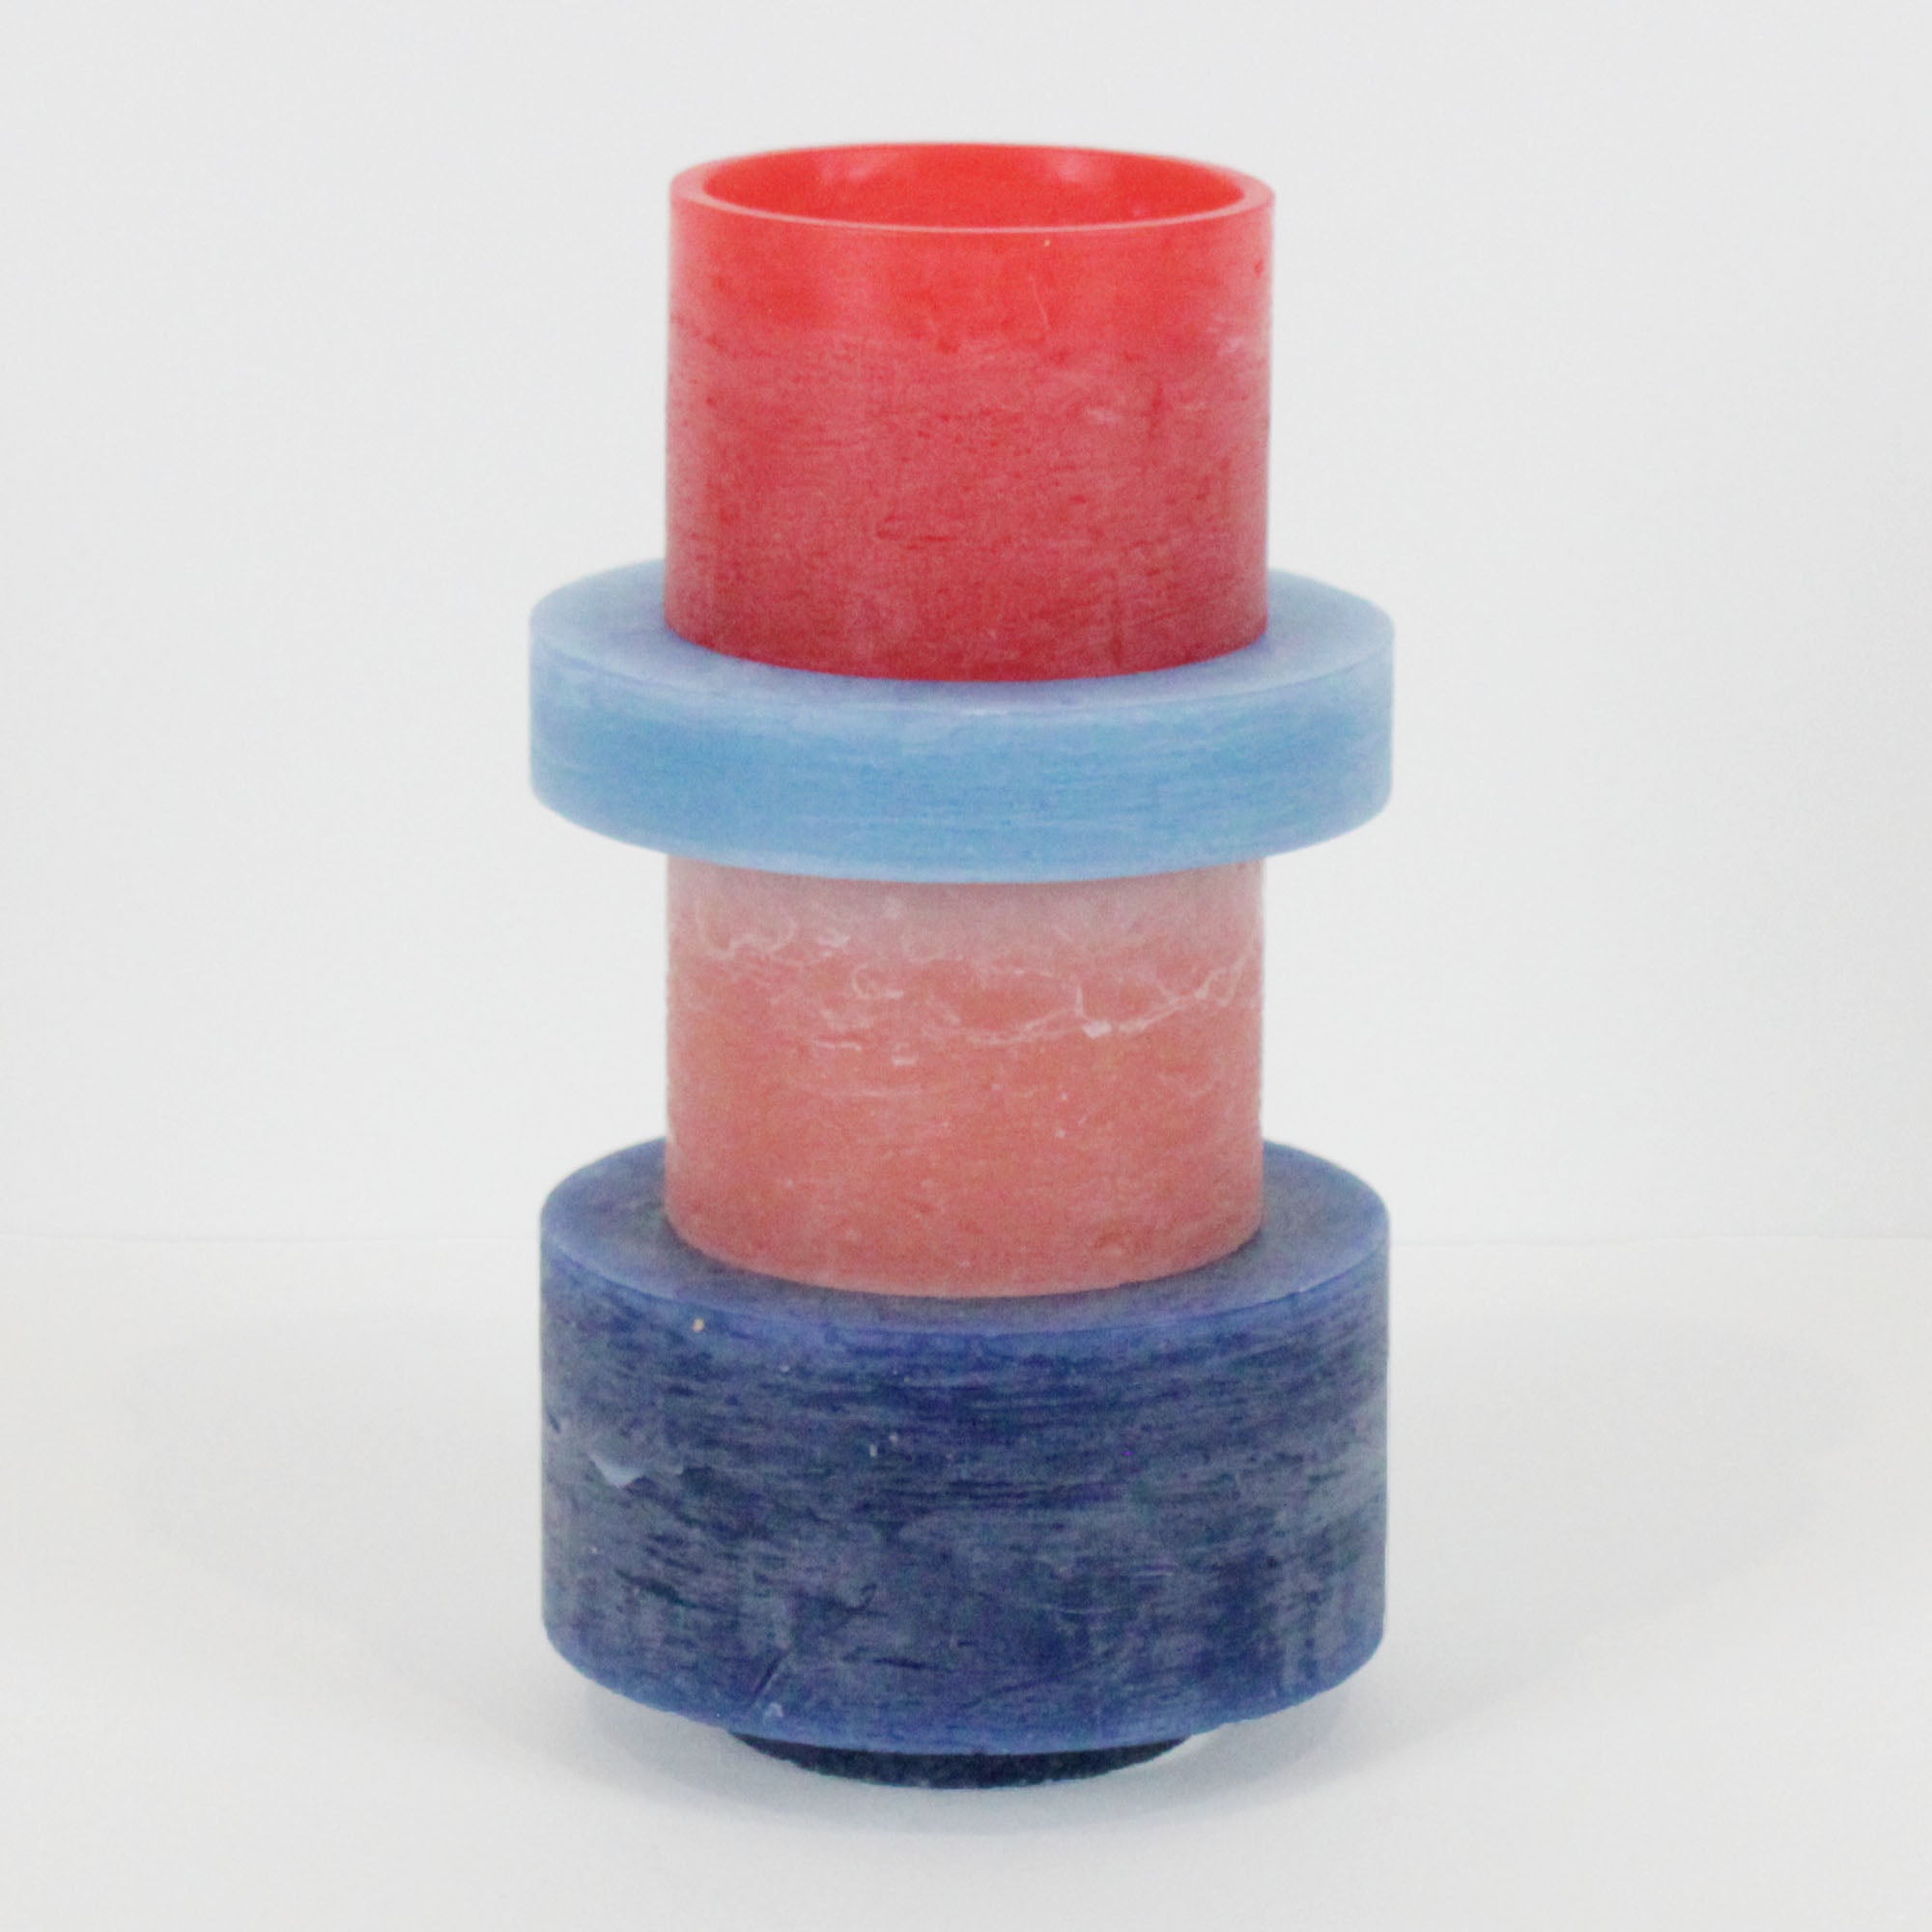 Candle Stack Limited Edition (Red/Blue)